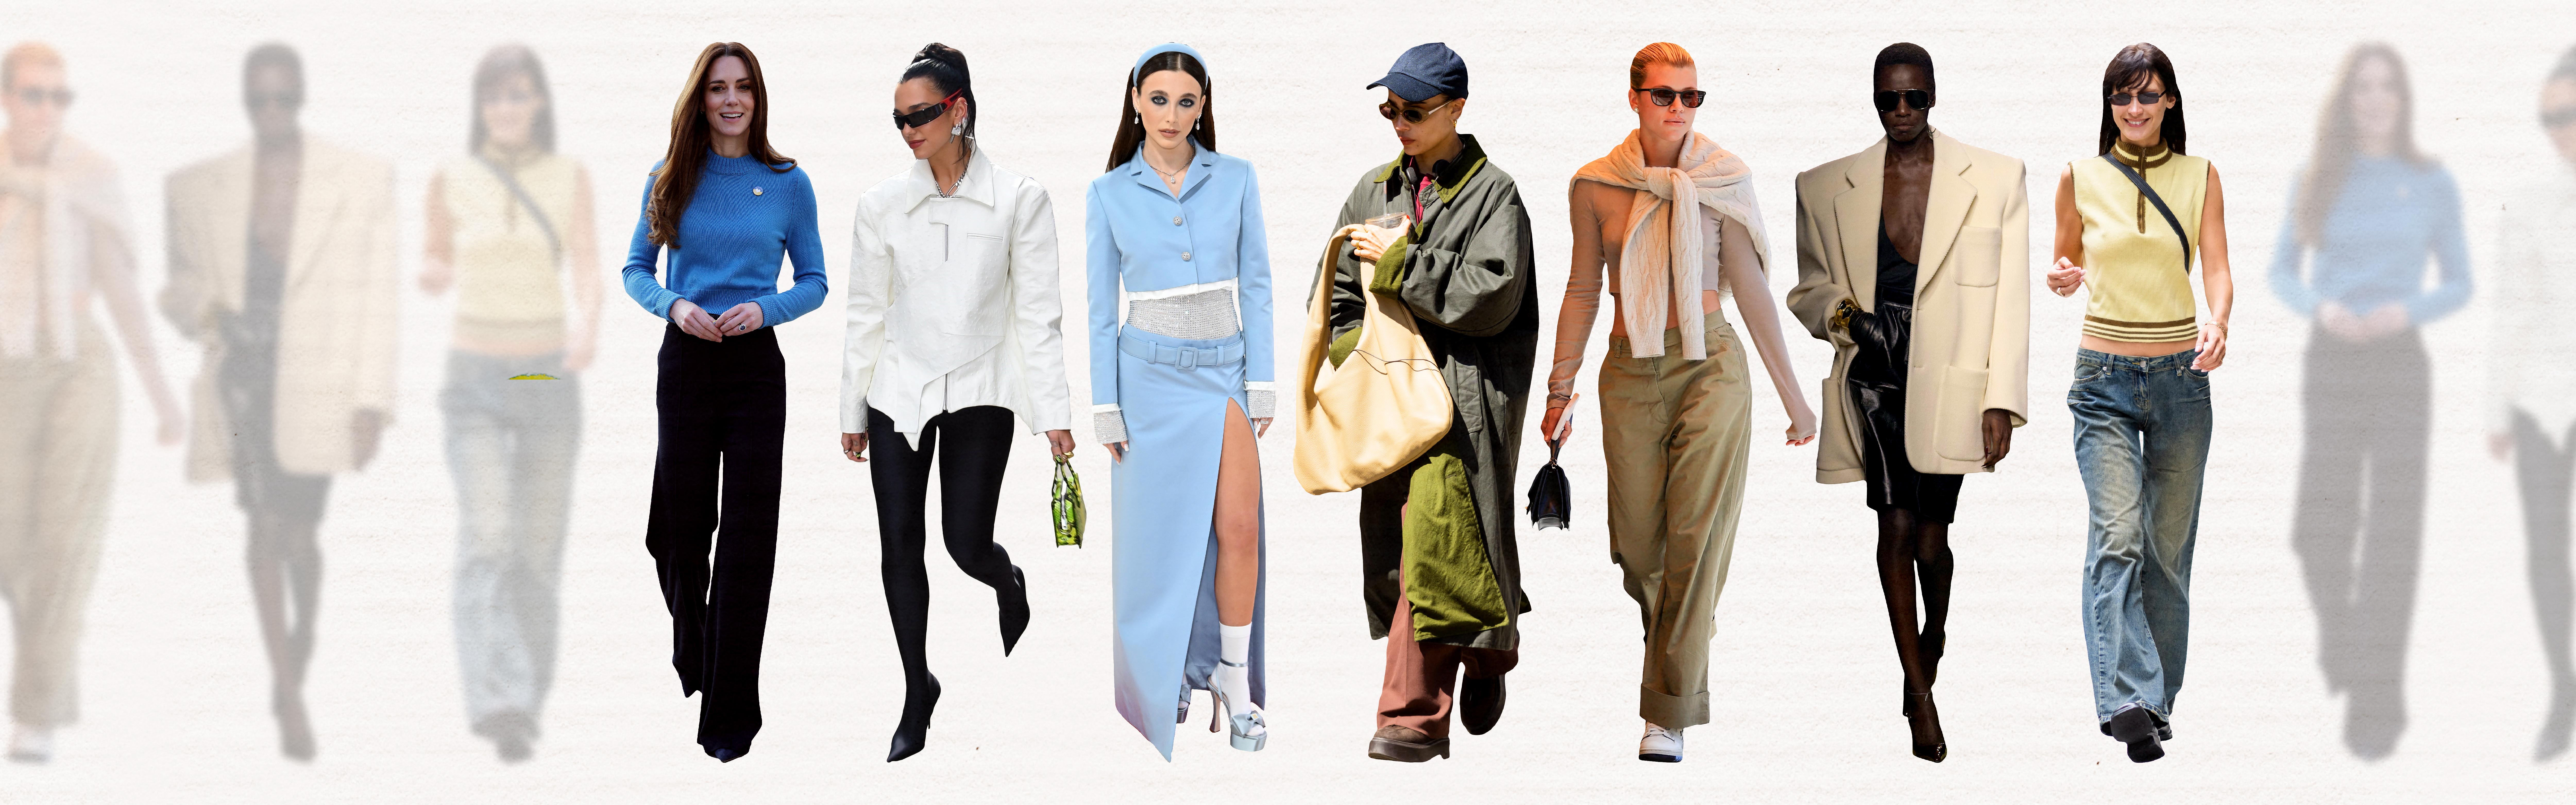 Welcome to the State of Style: 7 Major Shifts That Are Defining the Early 2020s